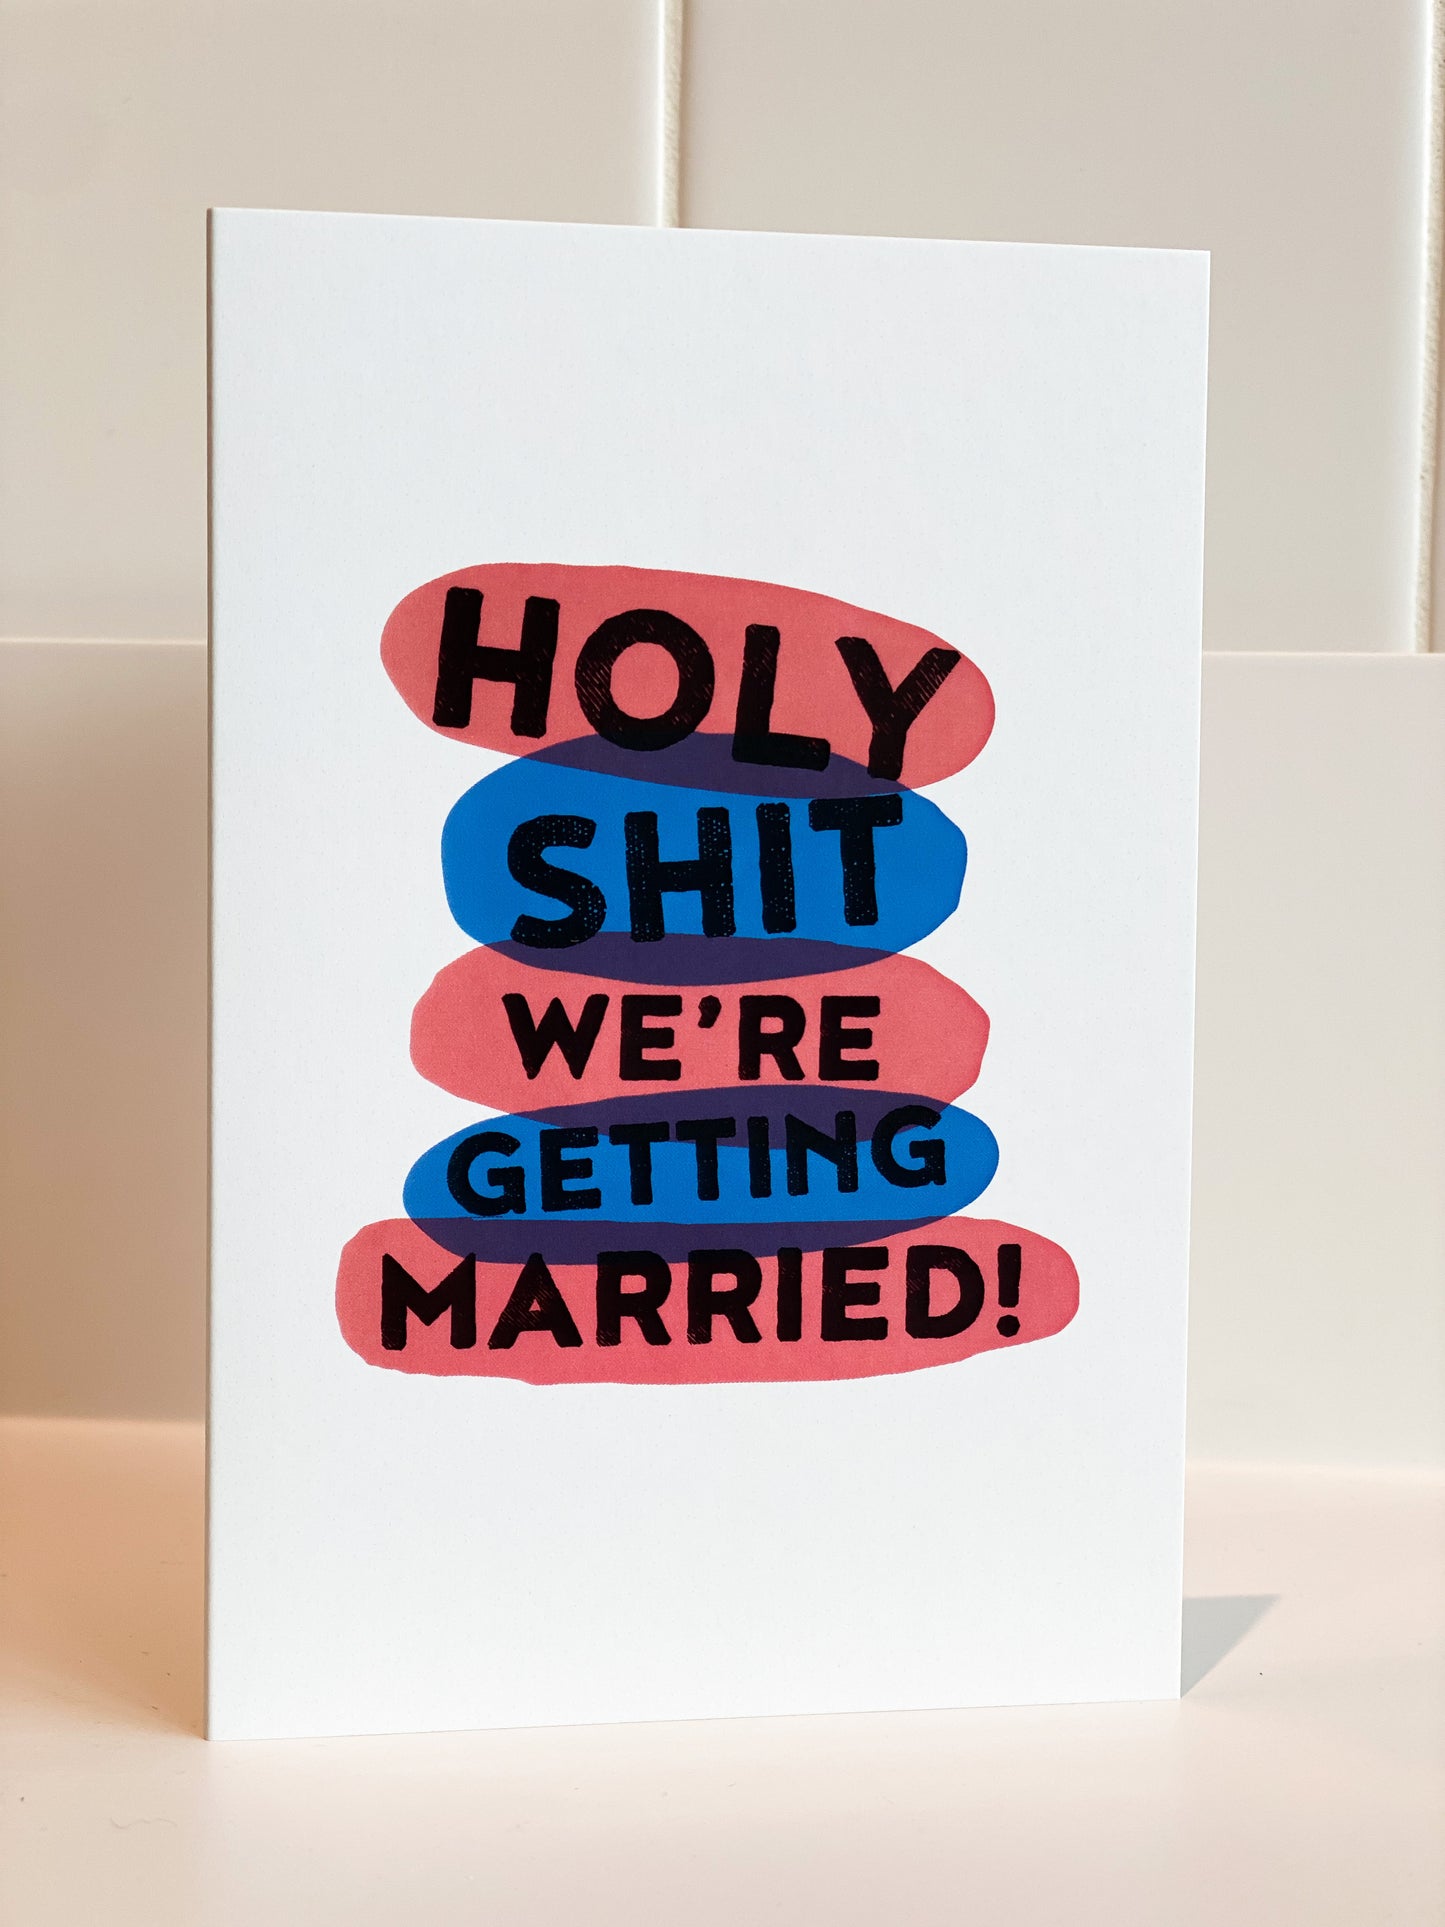 Woodbine Drive - Holy S*** We're Getting Married! Card